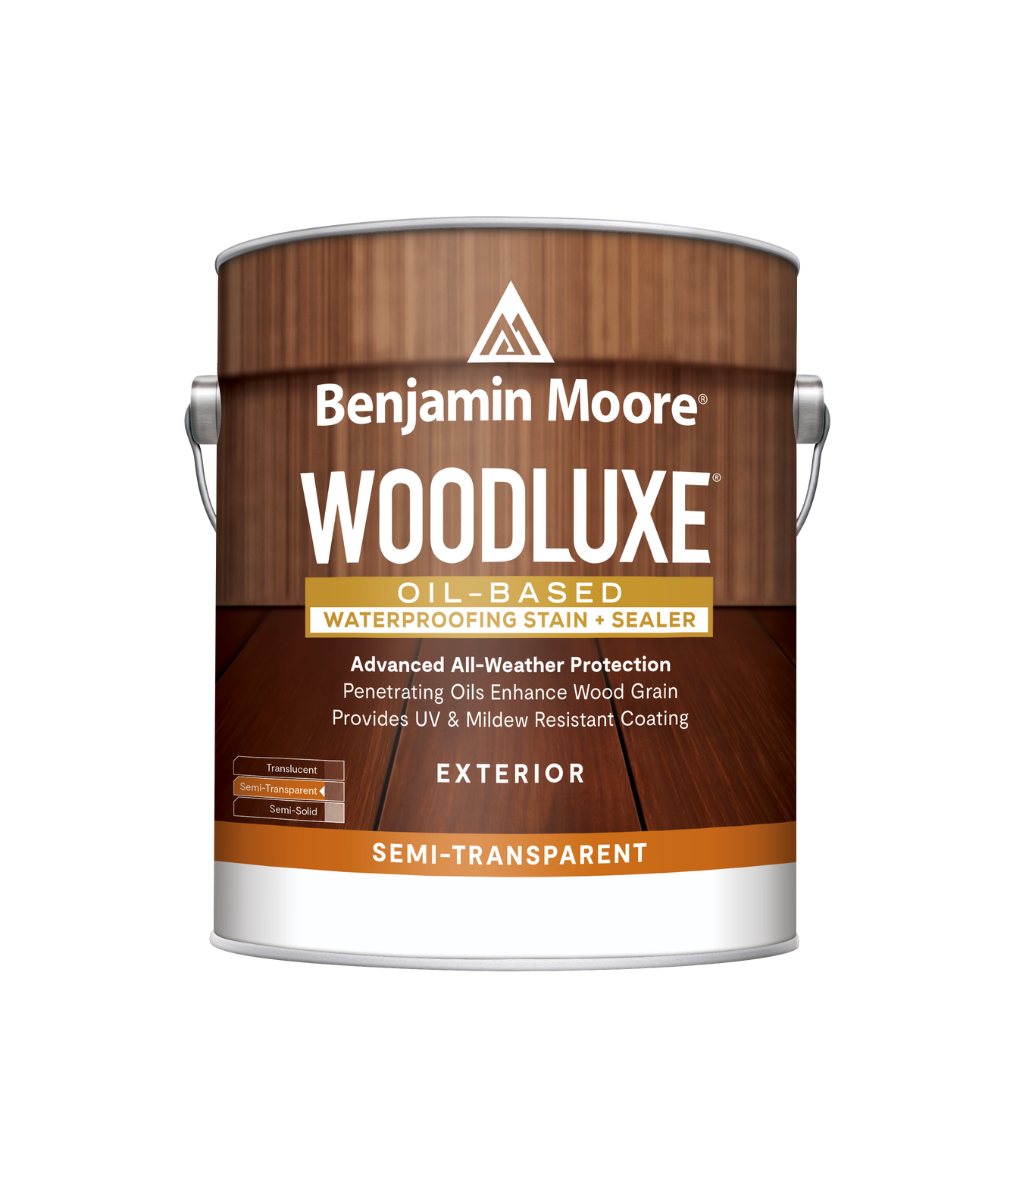 Benjamin Moore Woodluxe® Oil-Based Semi-Transparent Exterior Stain available at Clement's Paint in Austin, Texas.